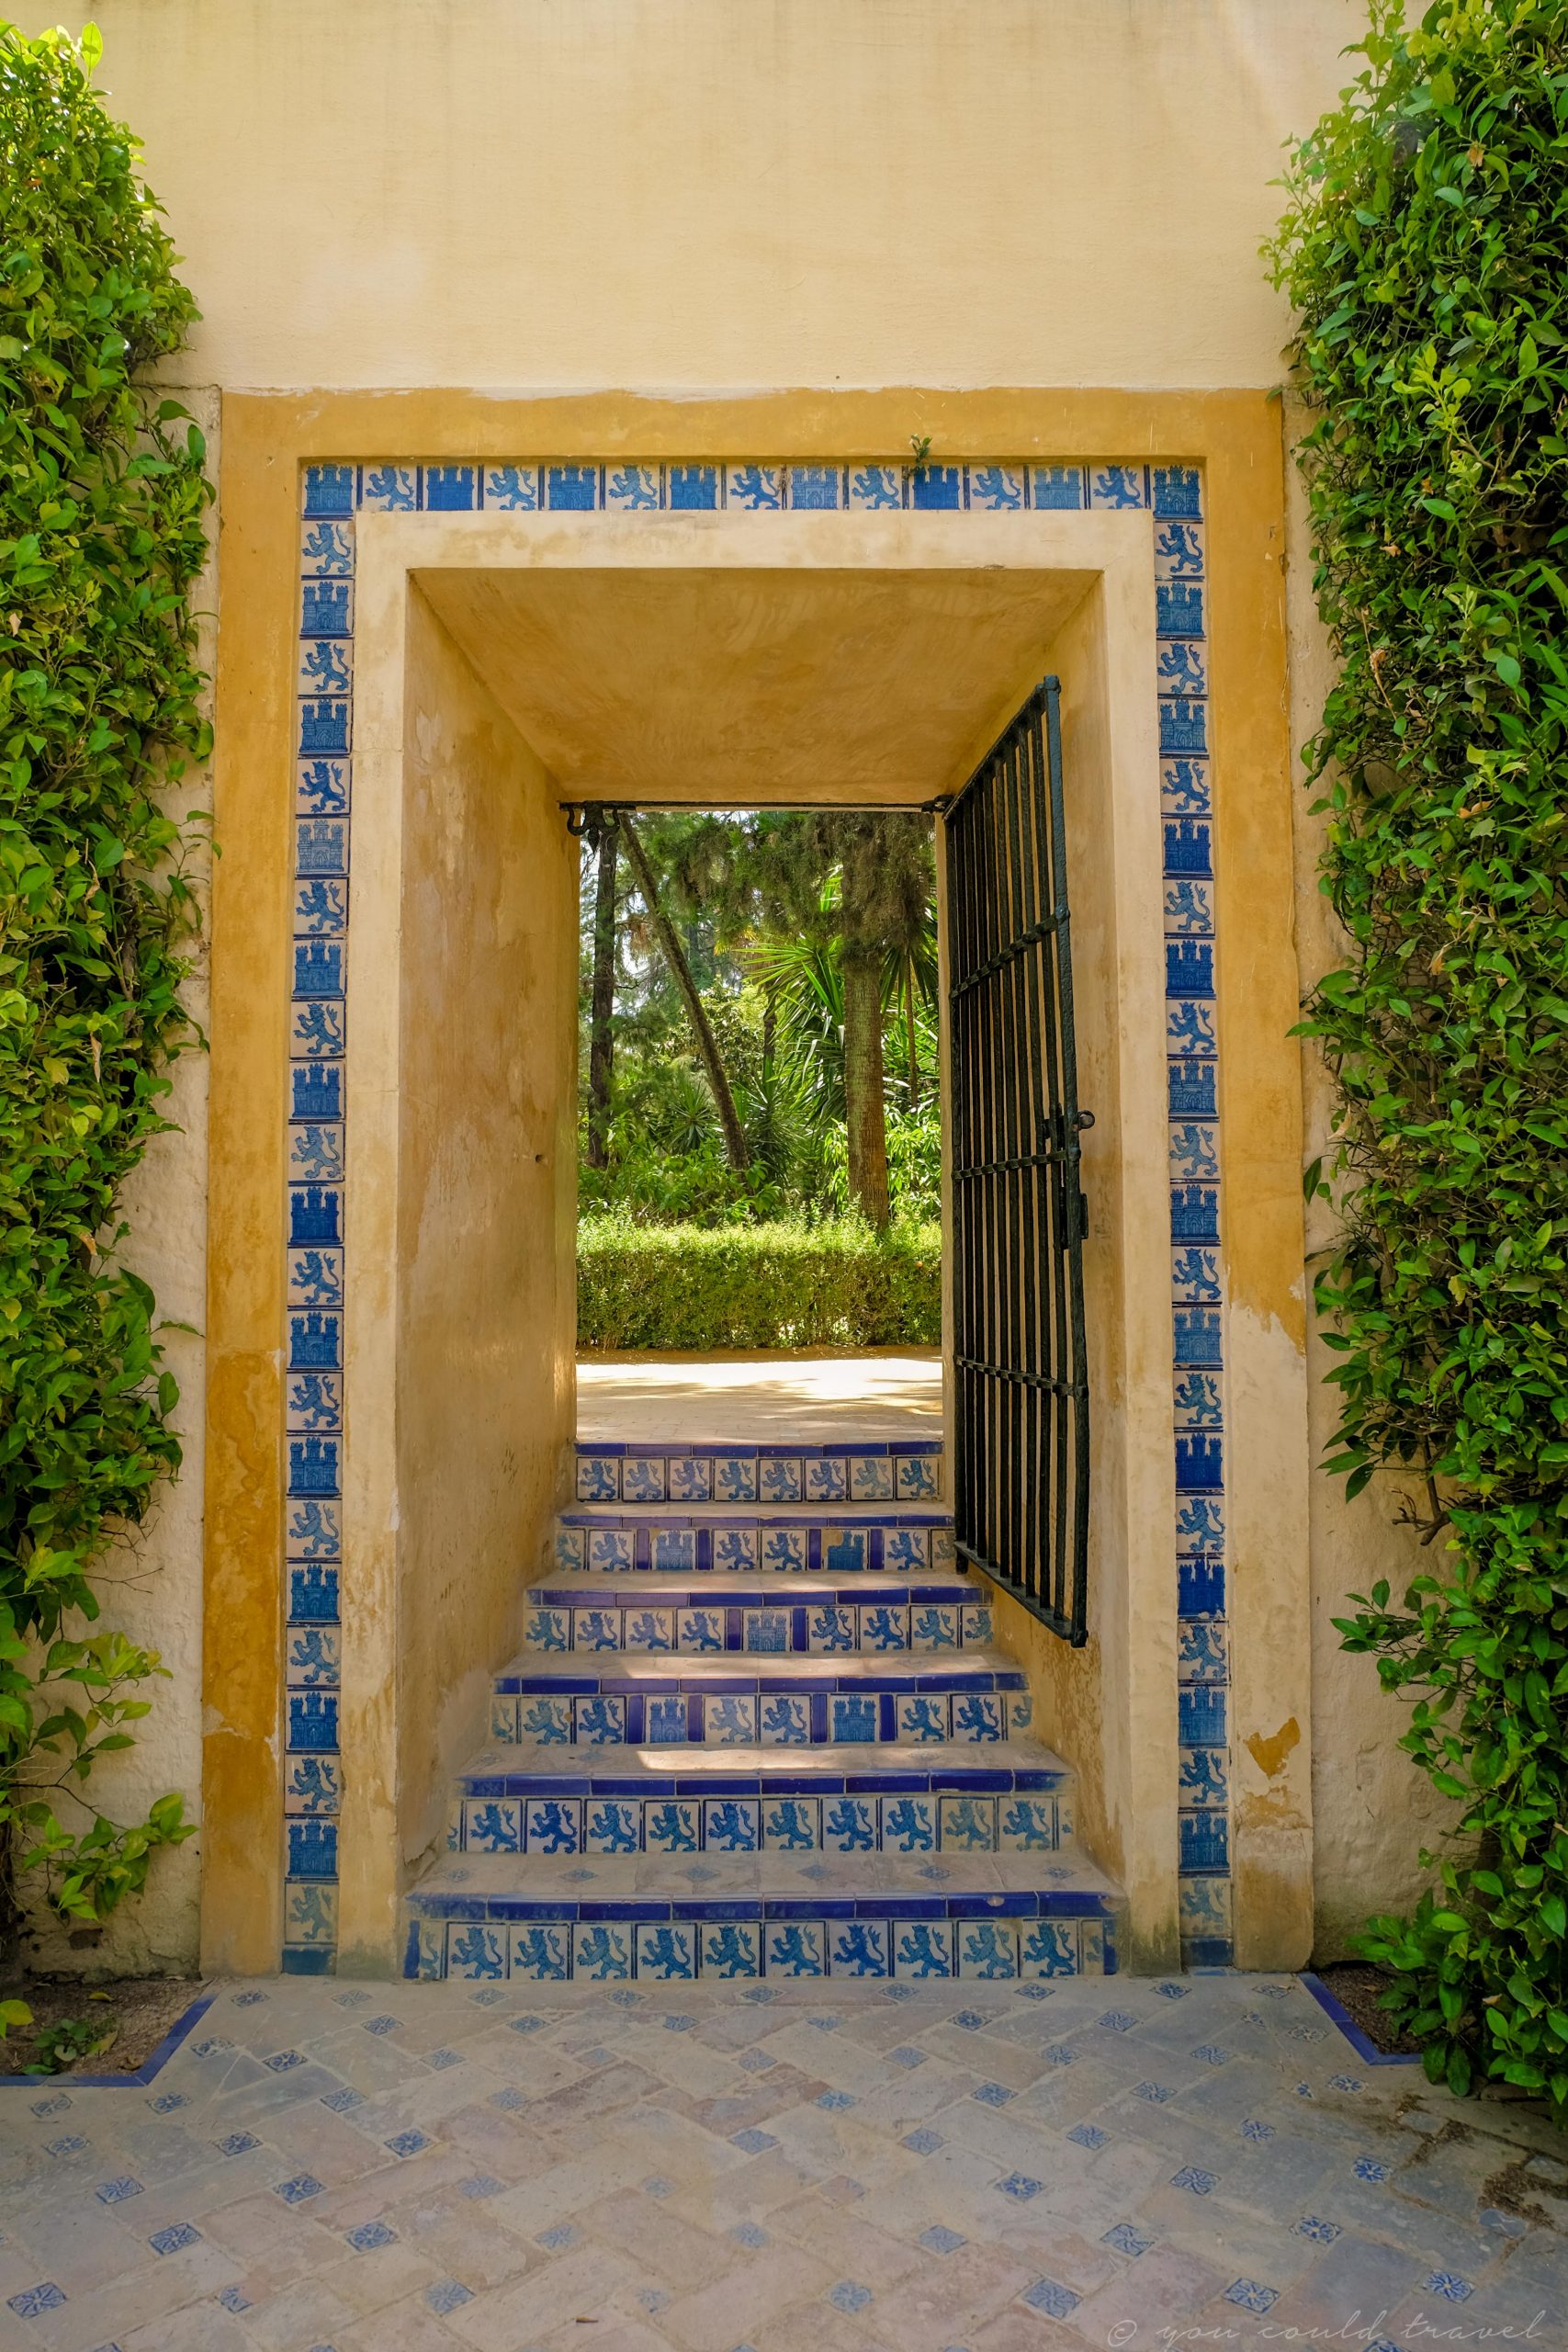 A doorway which leads to more vegetation in Seville Spain